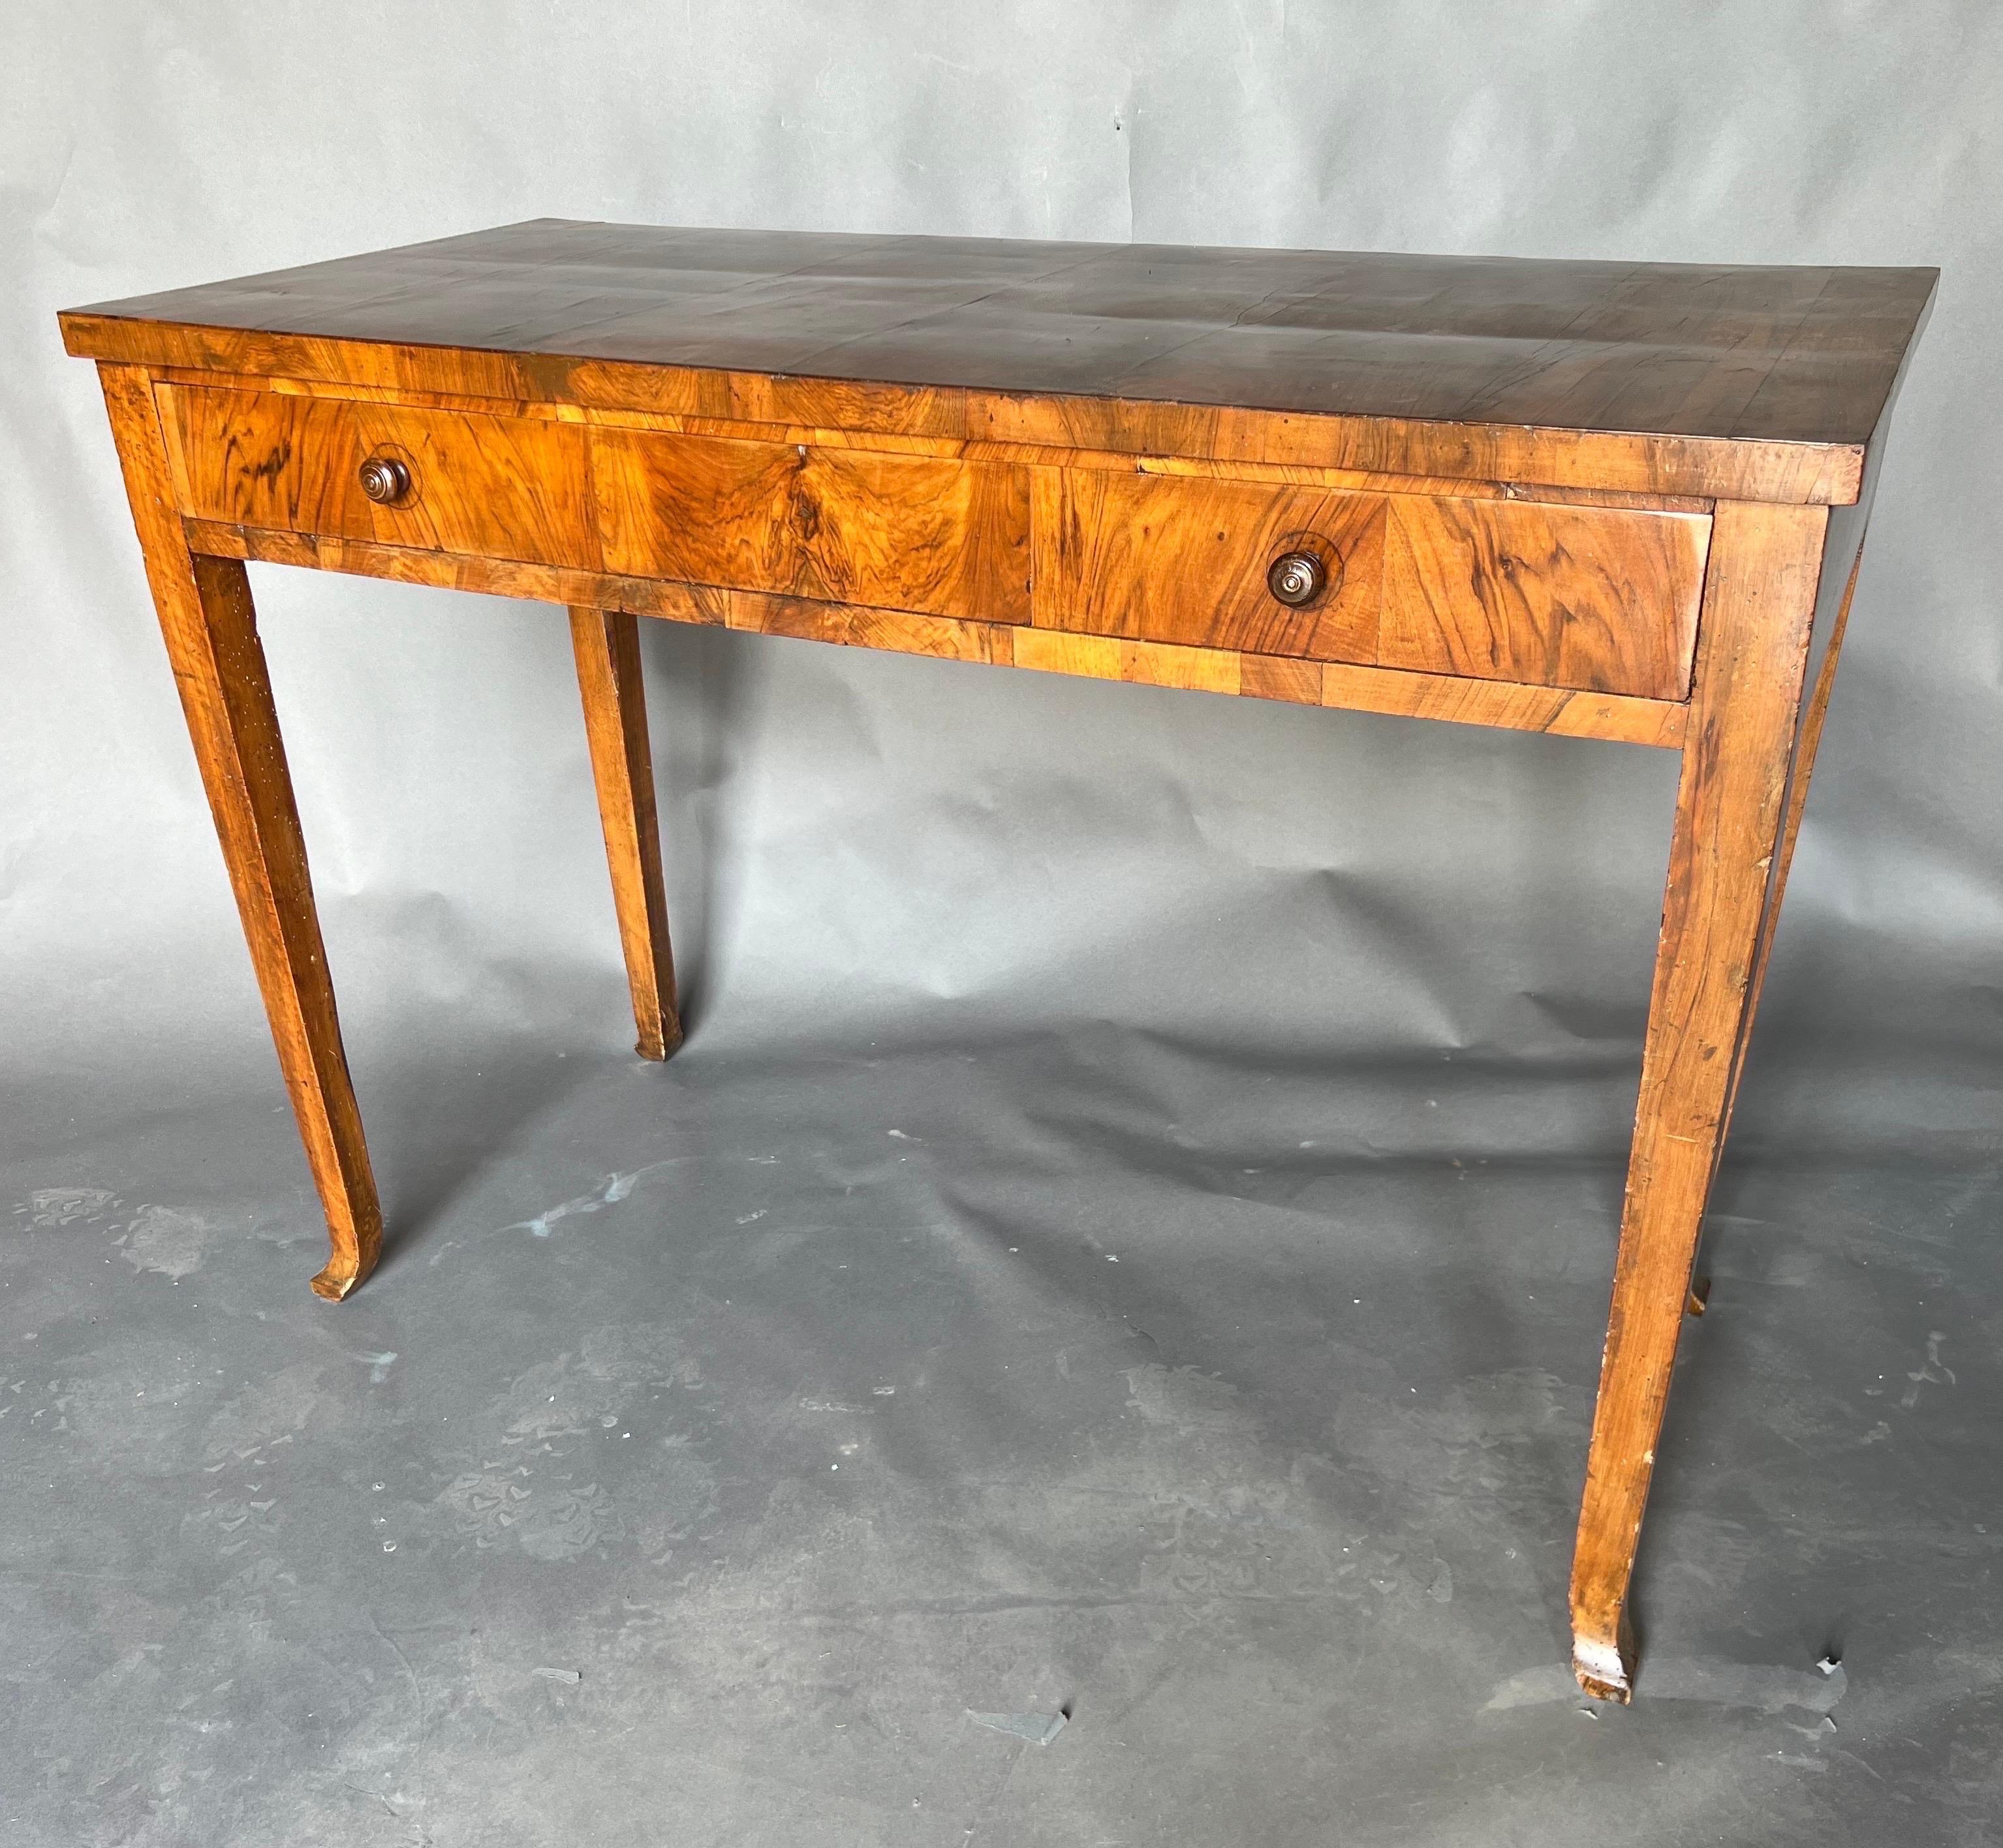 Gorgeous late 18th- early 19th century Biedermeier single drawer console with tapered legs. Nice scale and height. Could be used as a pier table or huntboard. 